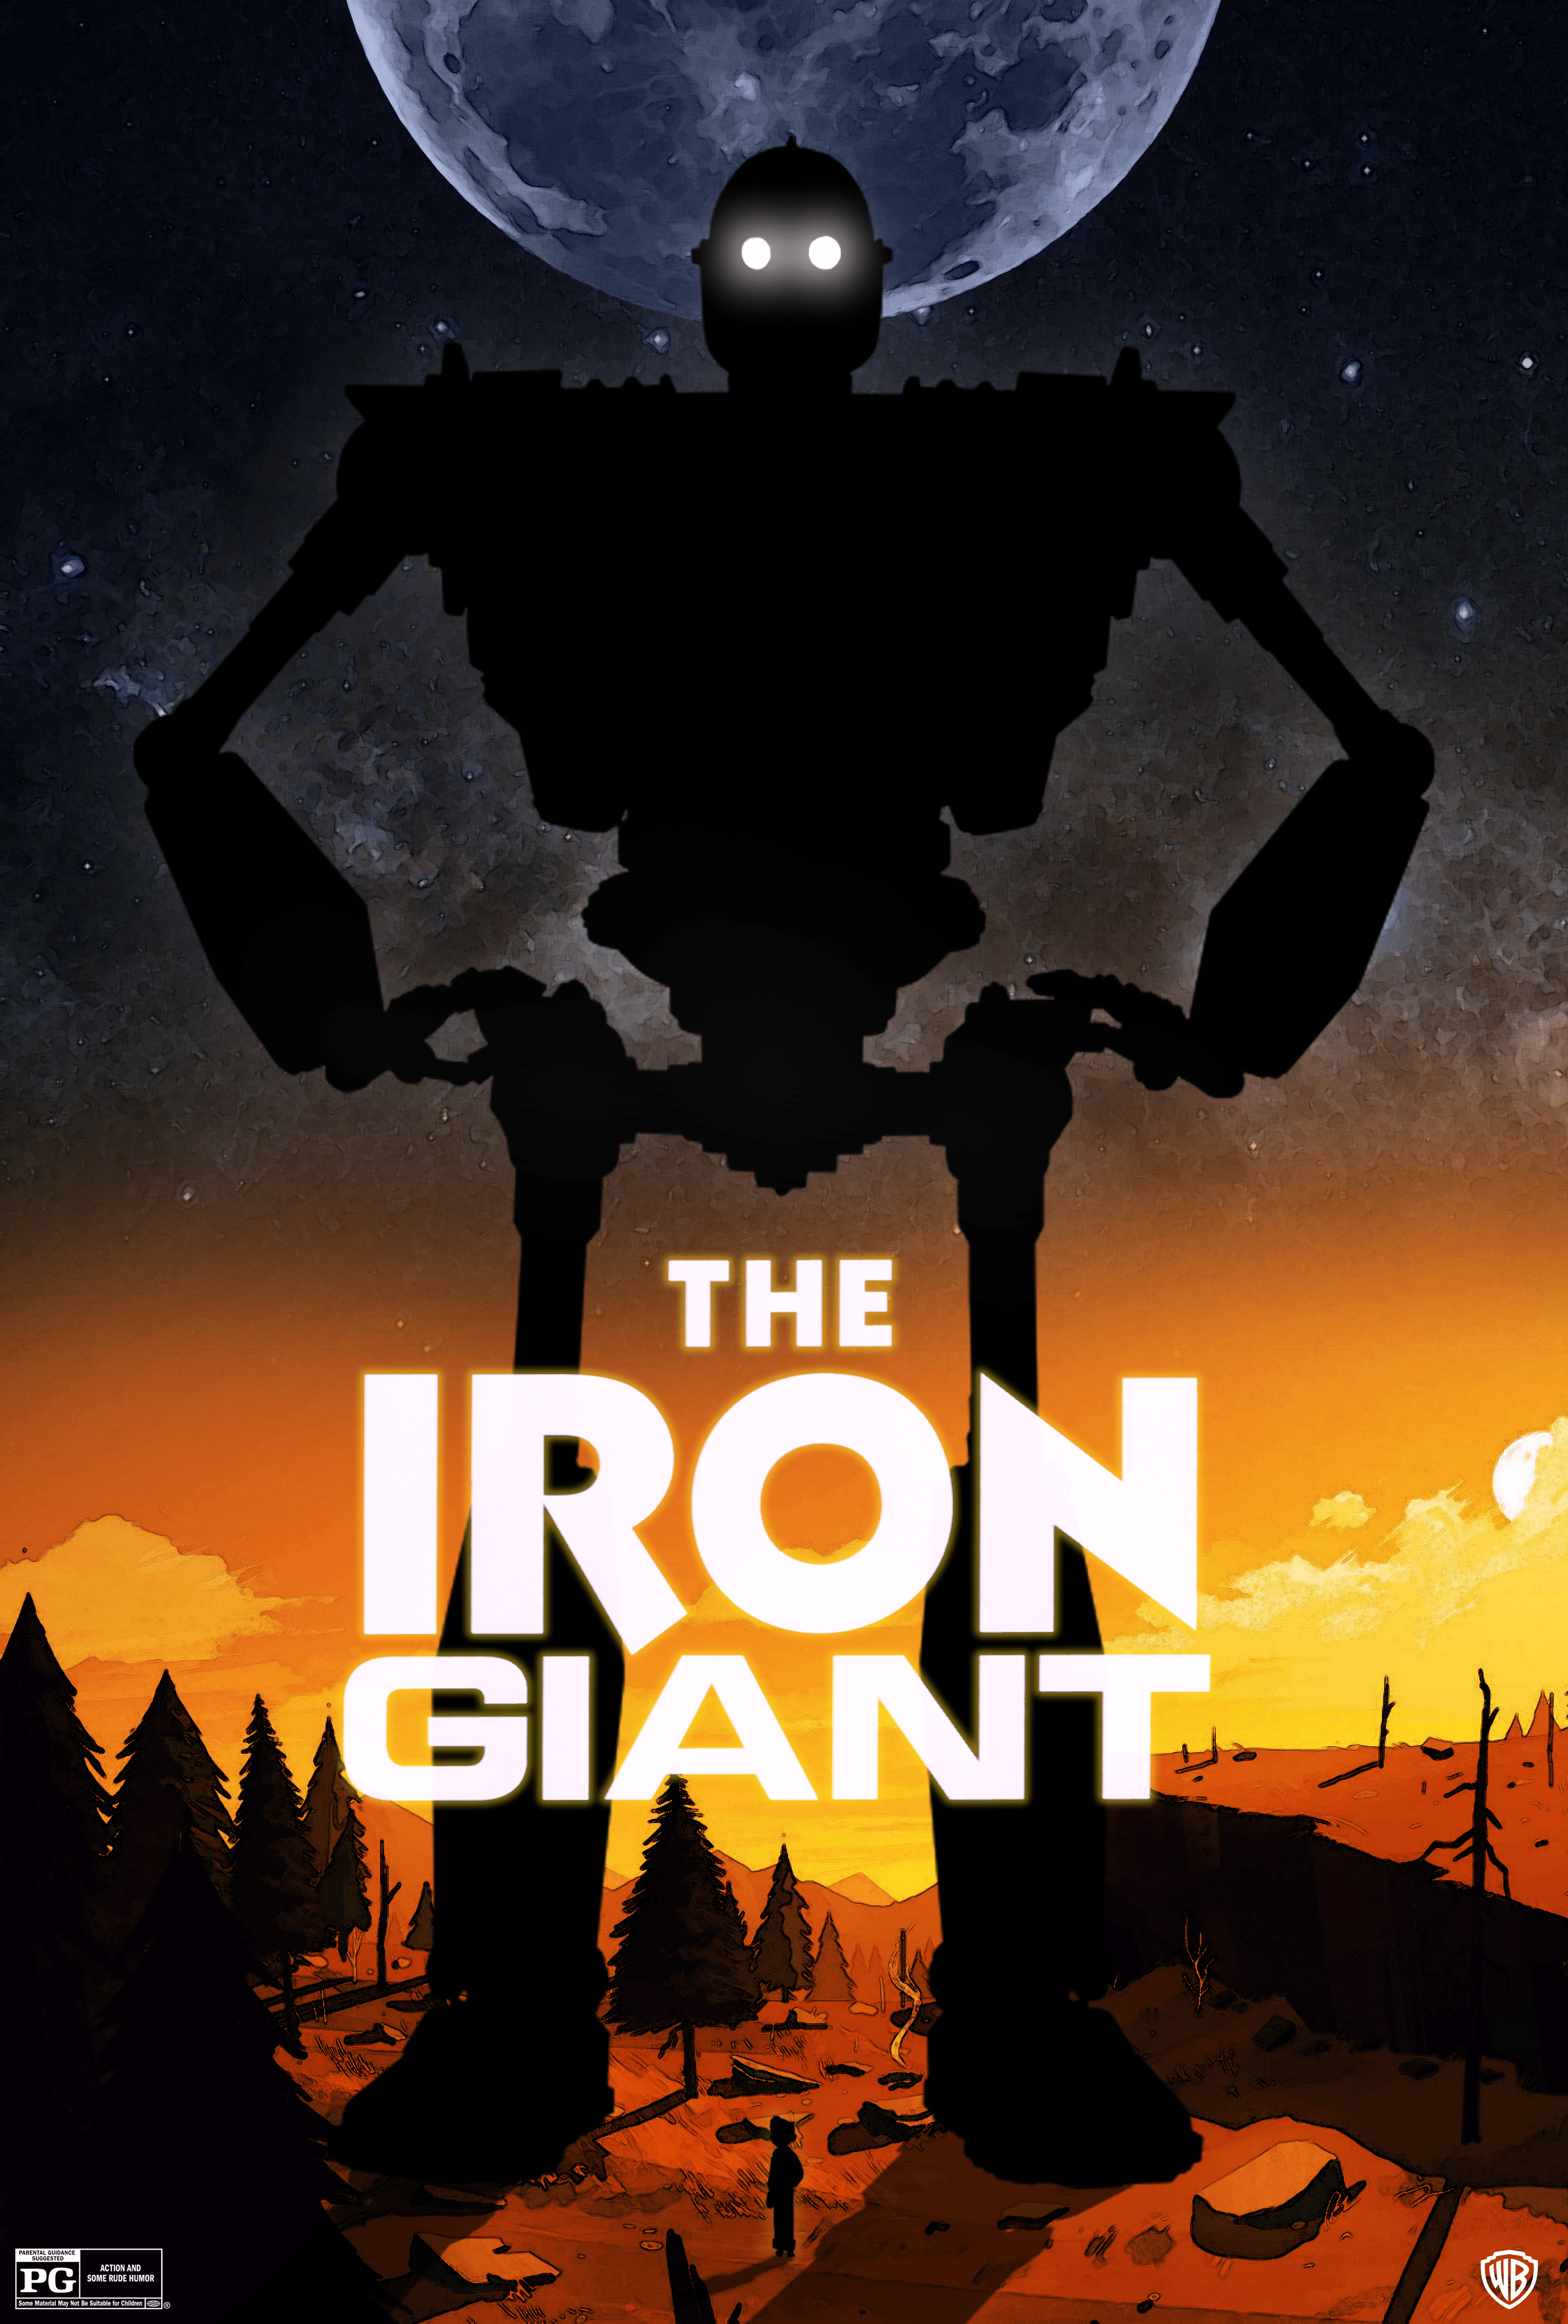 The Iron Giant (1999) HD Wallpaper From Gallsource.com. Movie